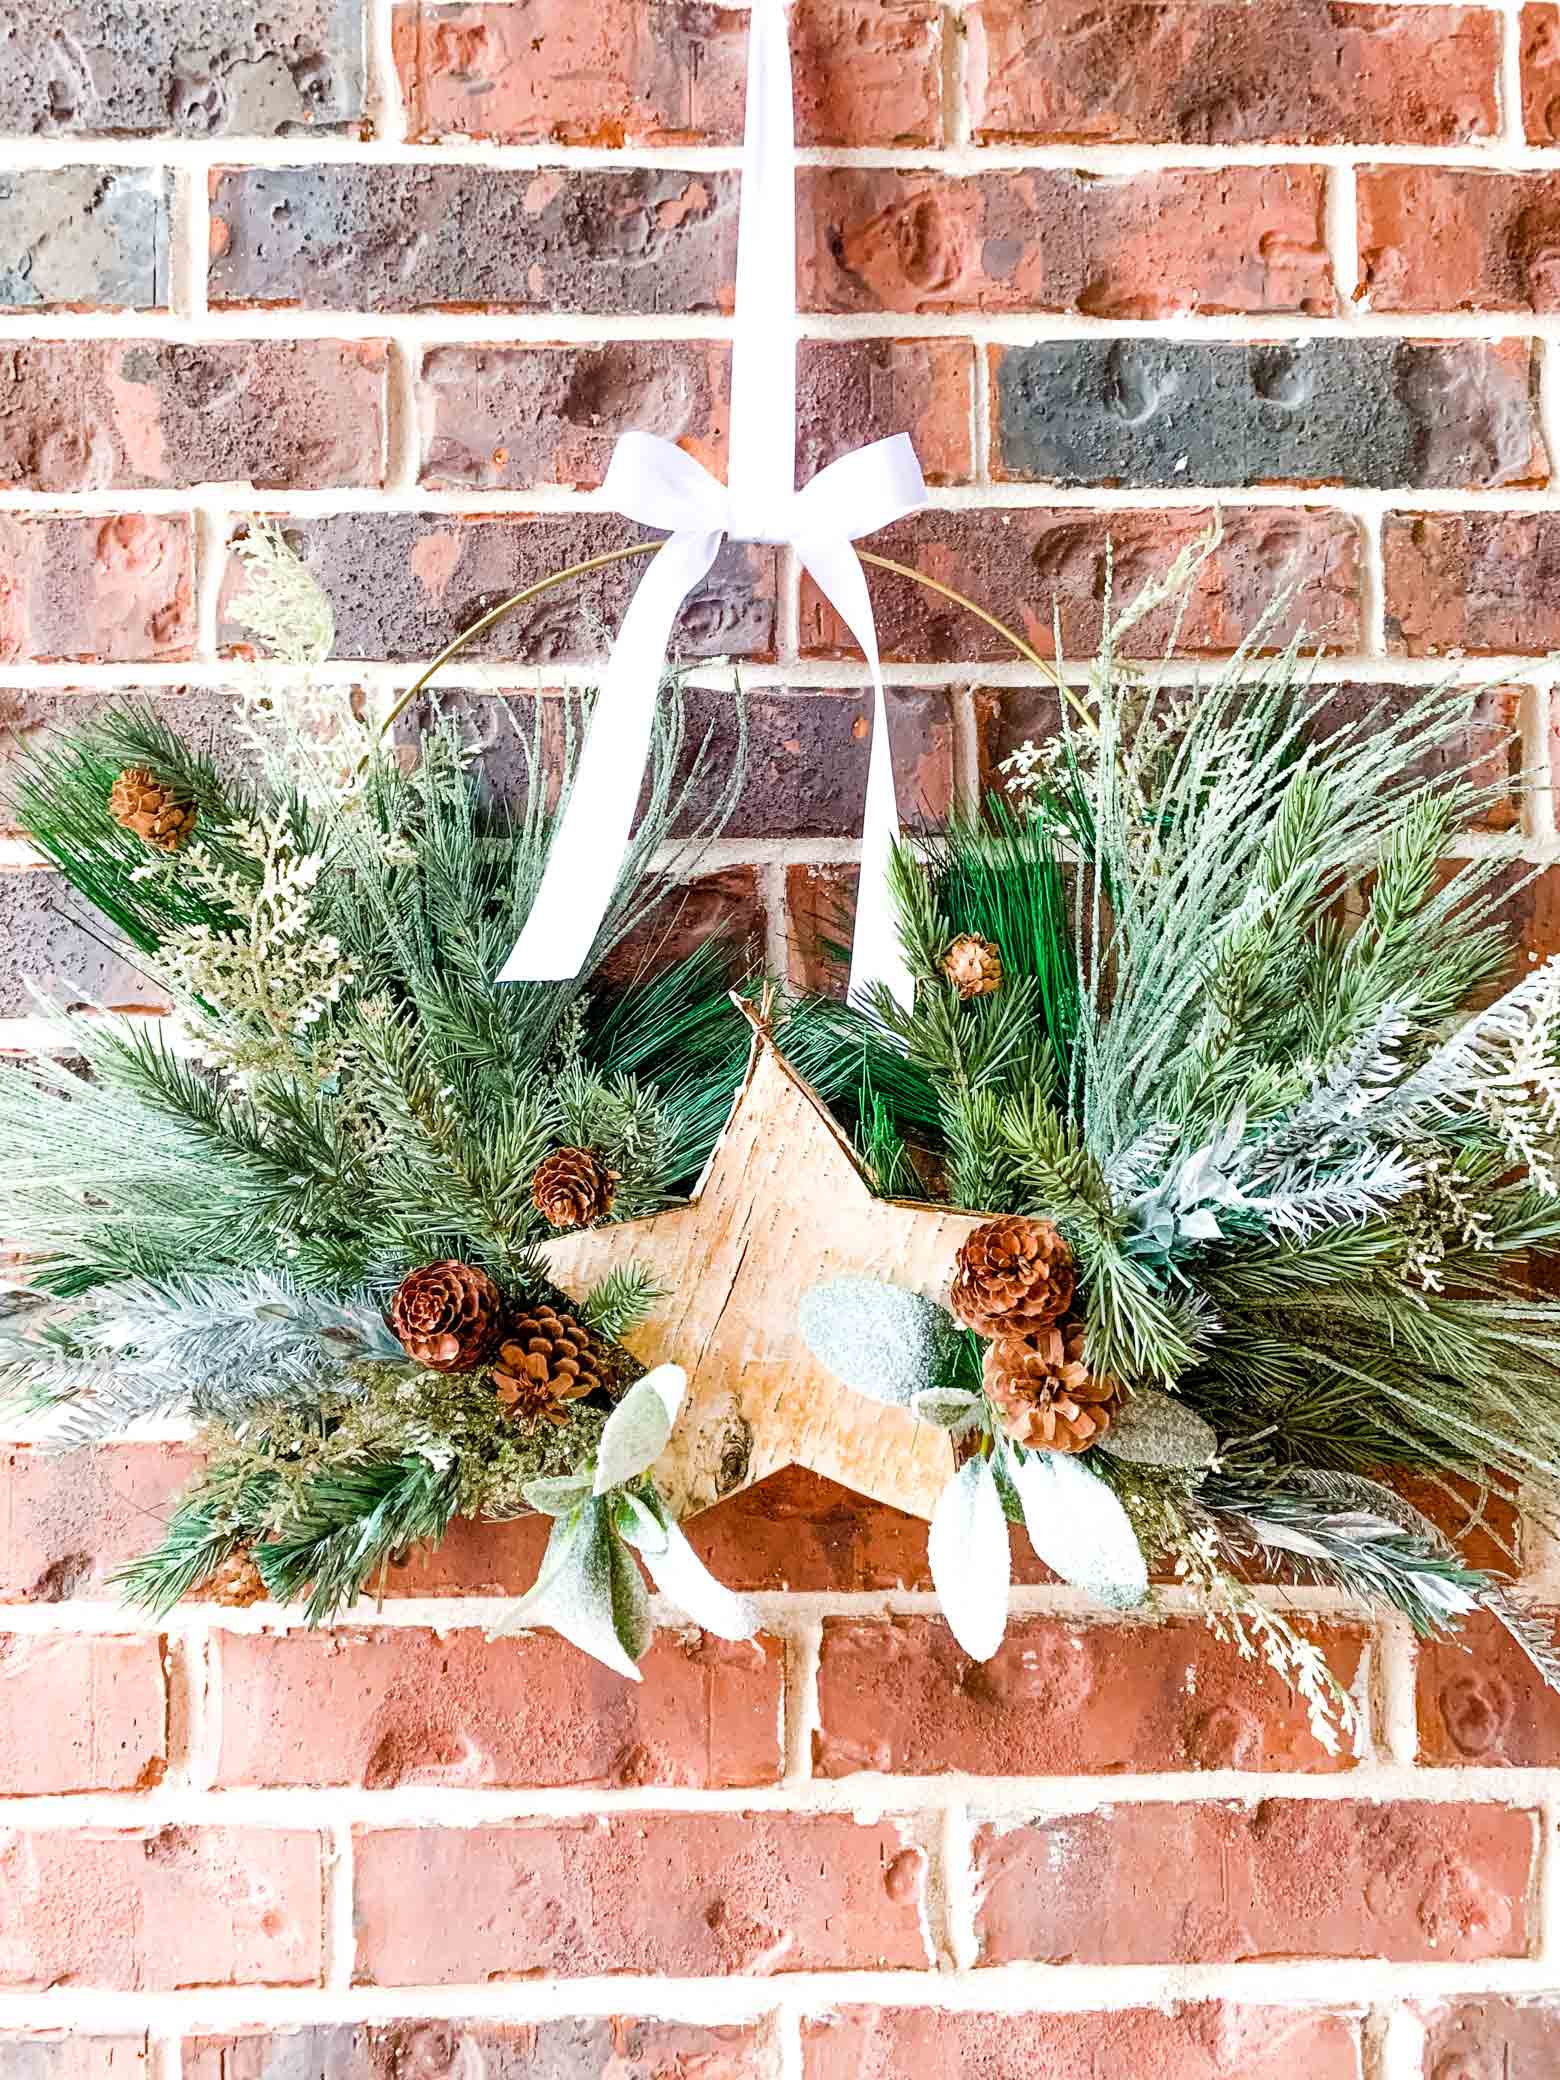 Top Must-Have Wreath Making Supplies for Beginners